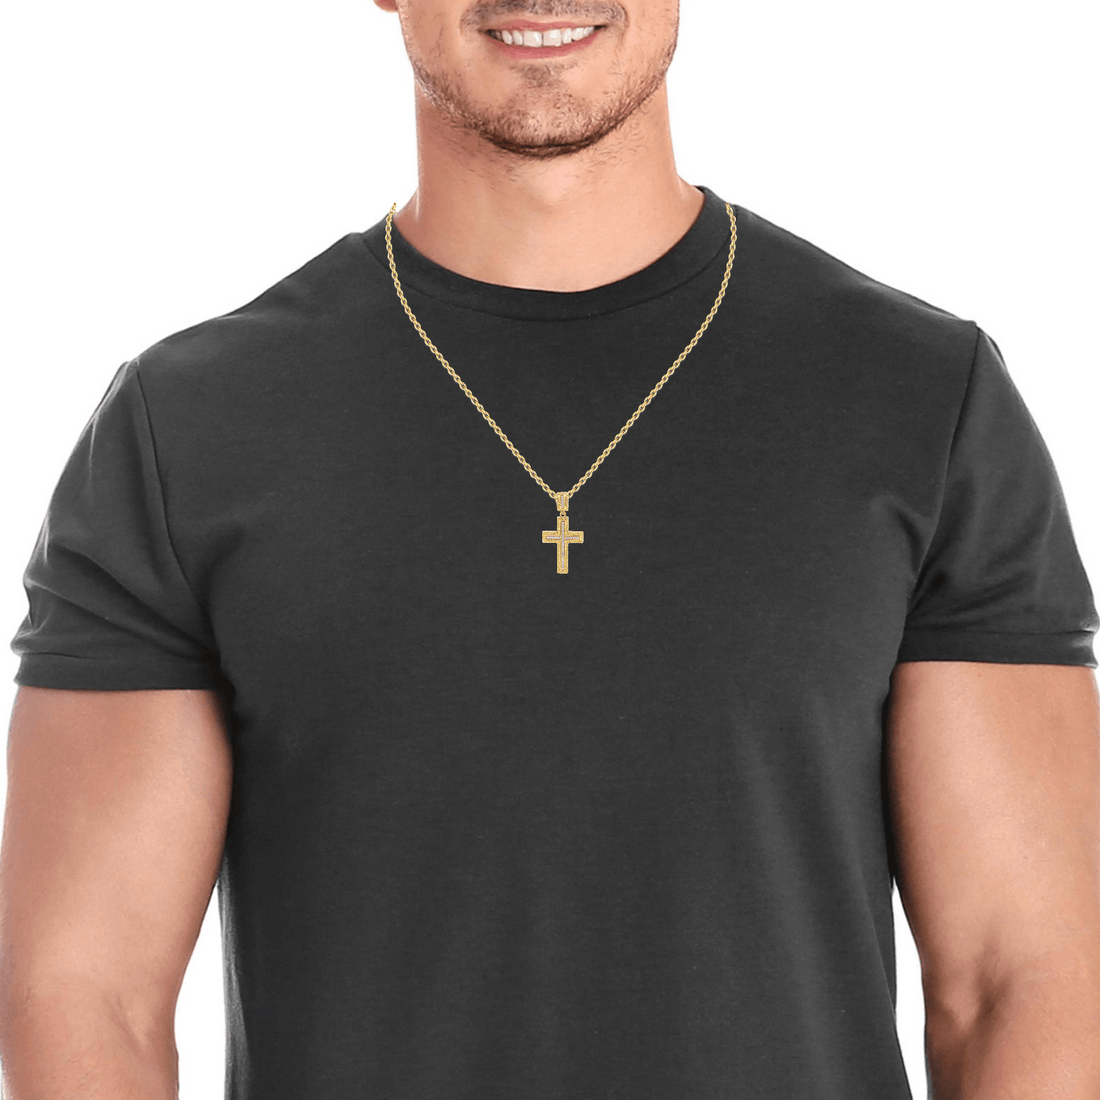 Baikalla Jewelry 14K Pure Yellow Gold Pendant Copy of Sterling Silver Gold Plated Cross Moissanite Charm Necklace